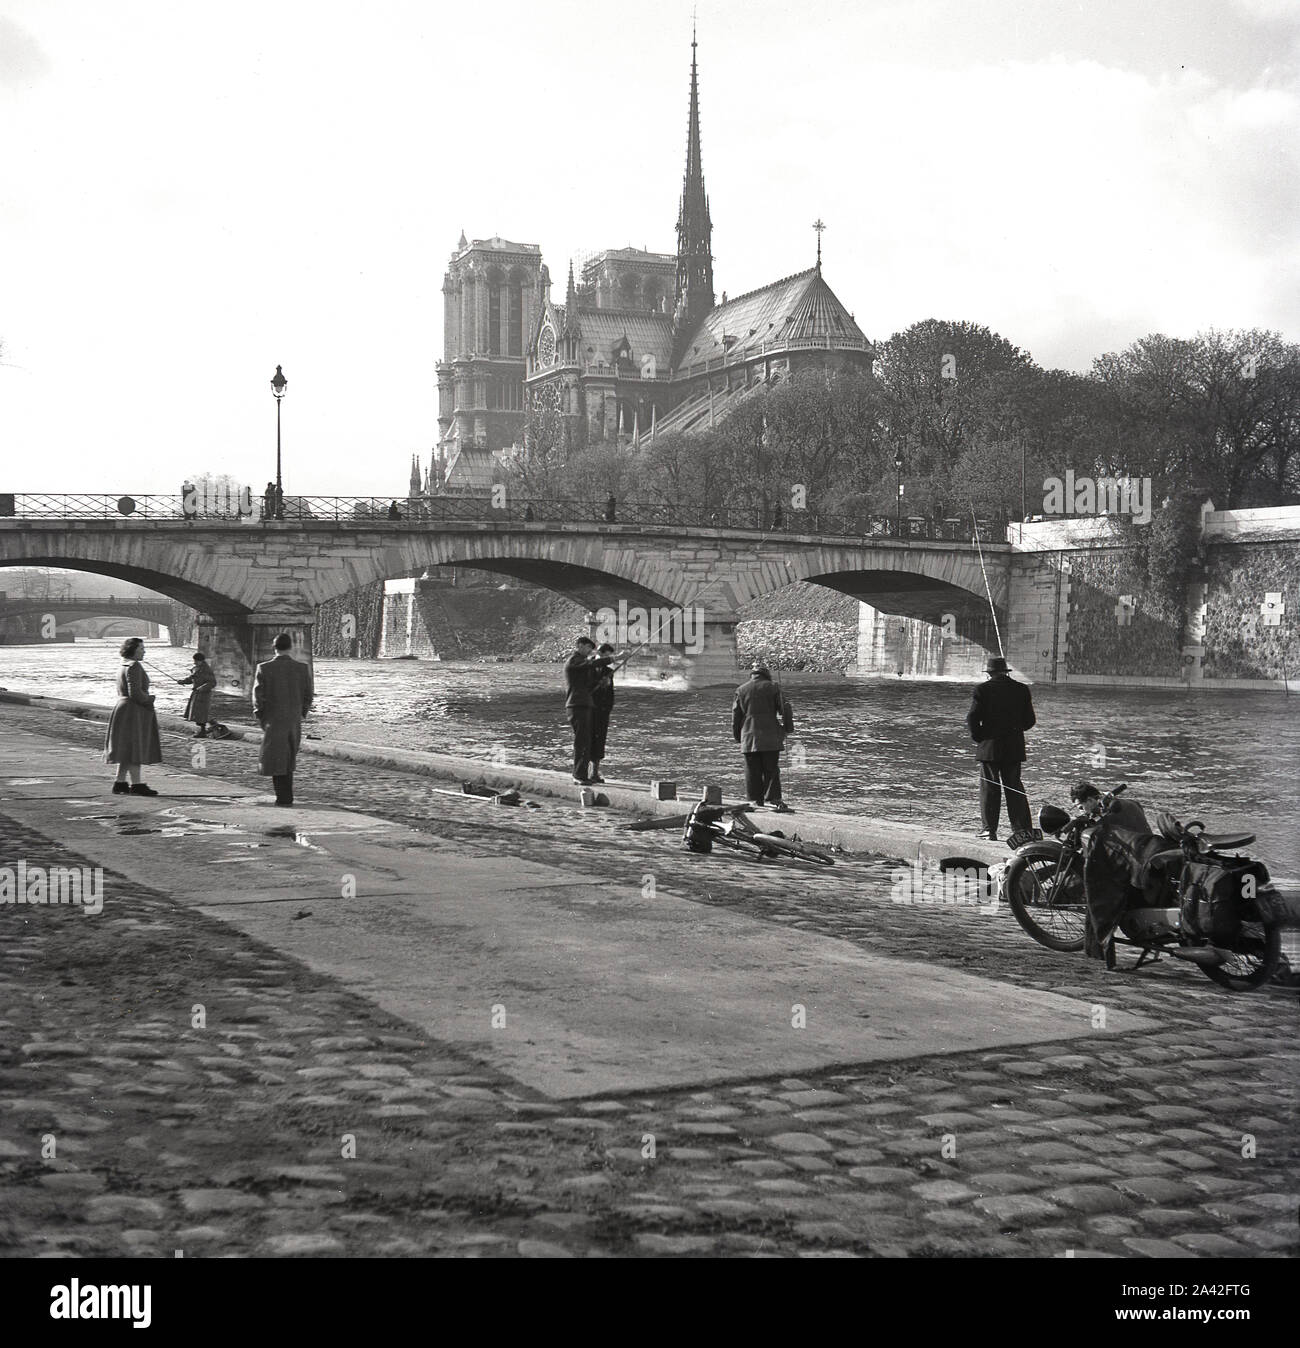 1950s, historical, parisian men fishing by the riverbank of the Seine at Pont de I'Archeveche, Paris, France, with the Notre-dame Catherdral in the background. Constructed in 1828, the 'Archbishop's Bridge' was built for the society 'Pont des Invalides' after the demolition of the suspension bridge at Les Invalides. Stock Photo